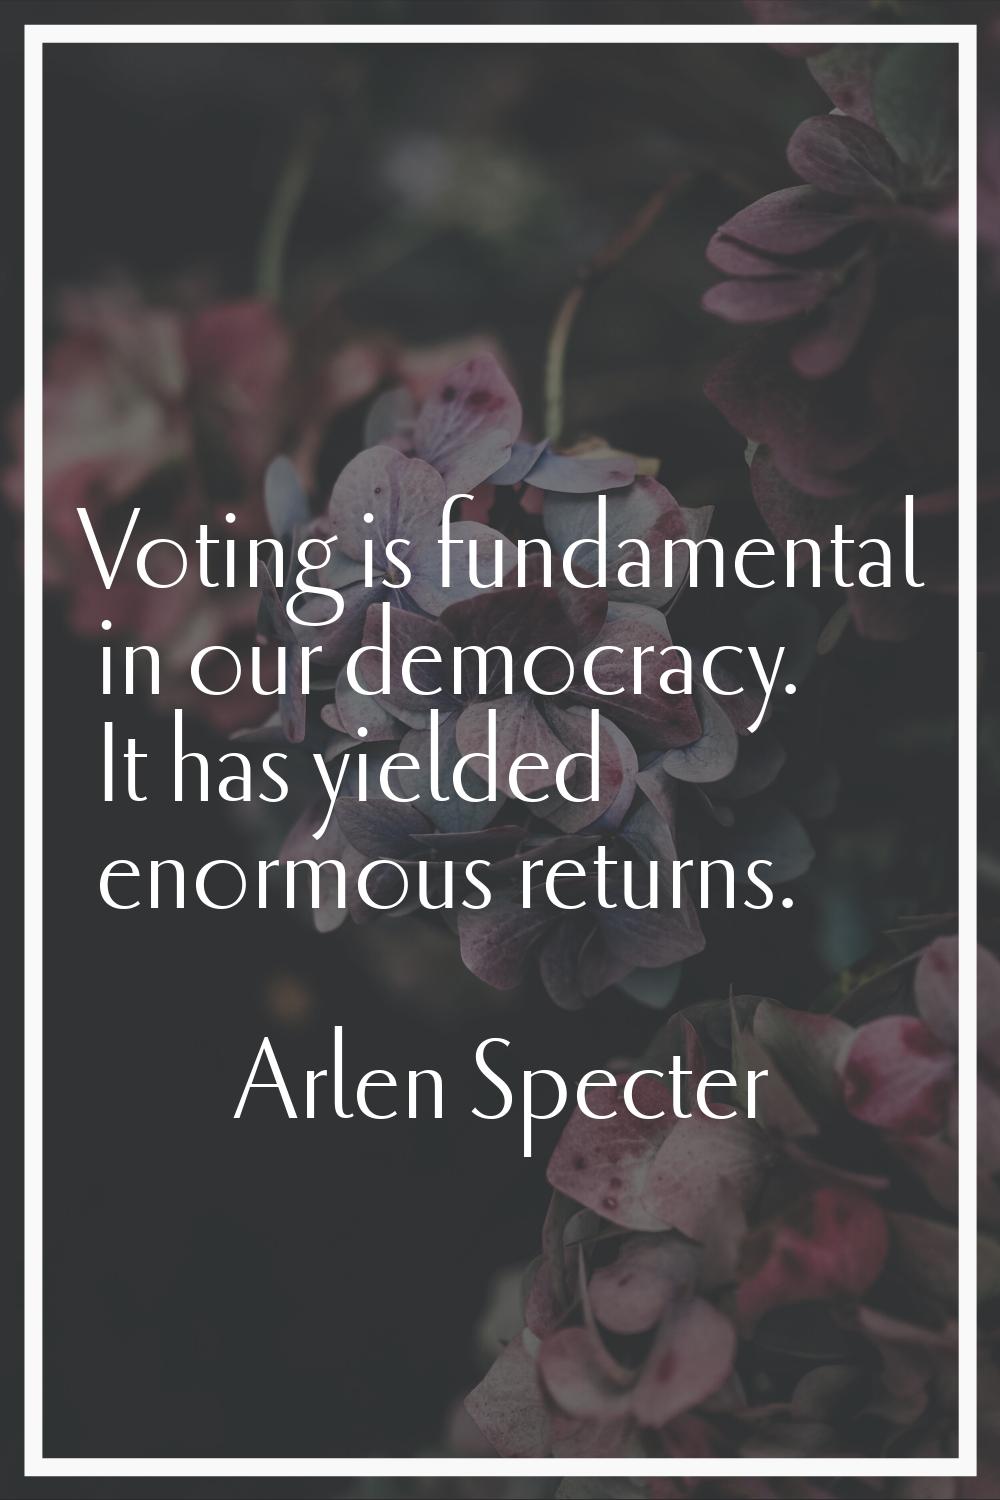 Voting is fundamental in our democracy. It has yielded enormous returns.